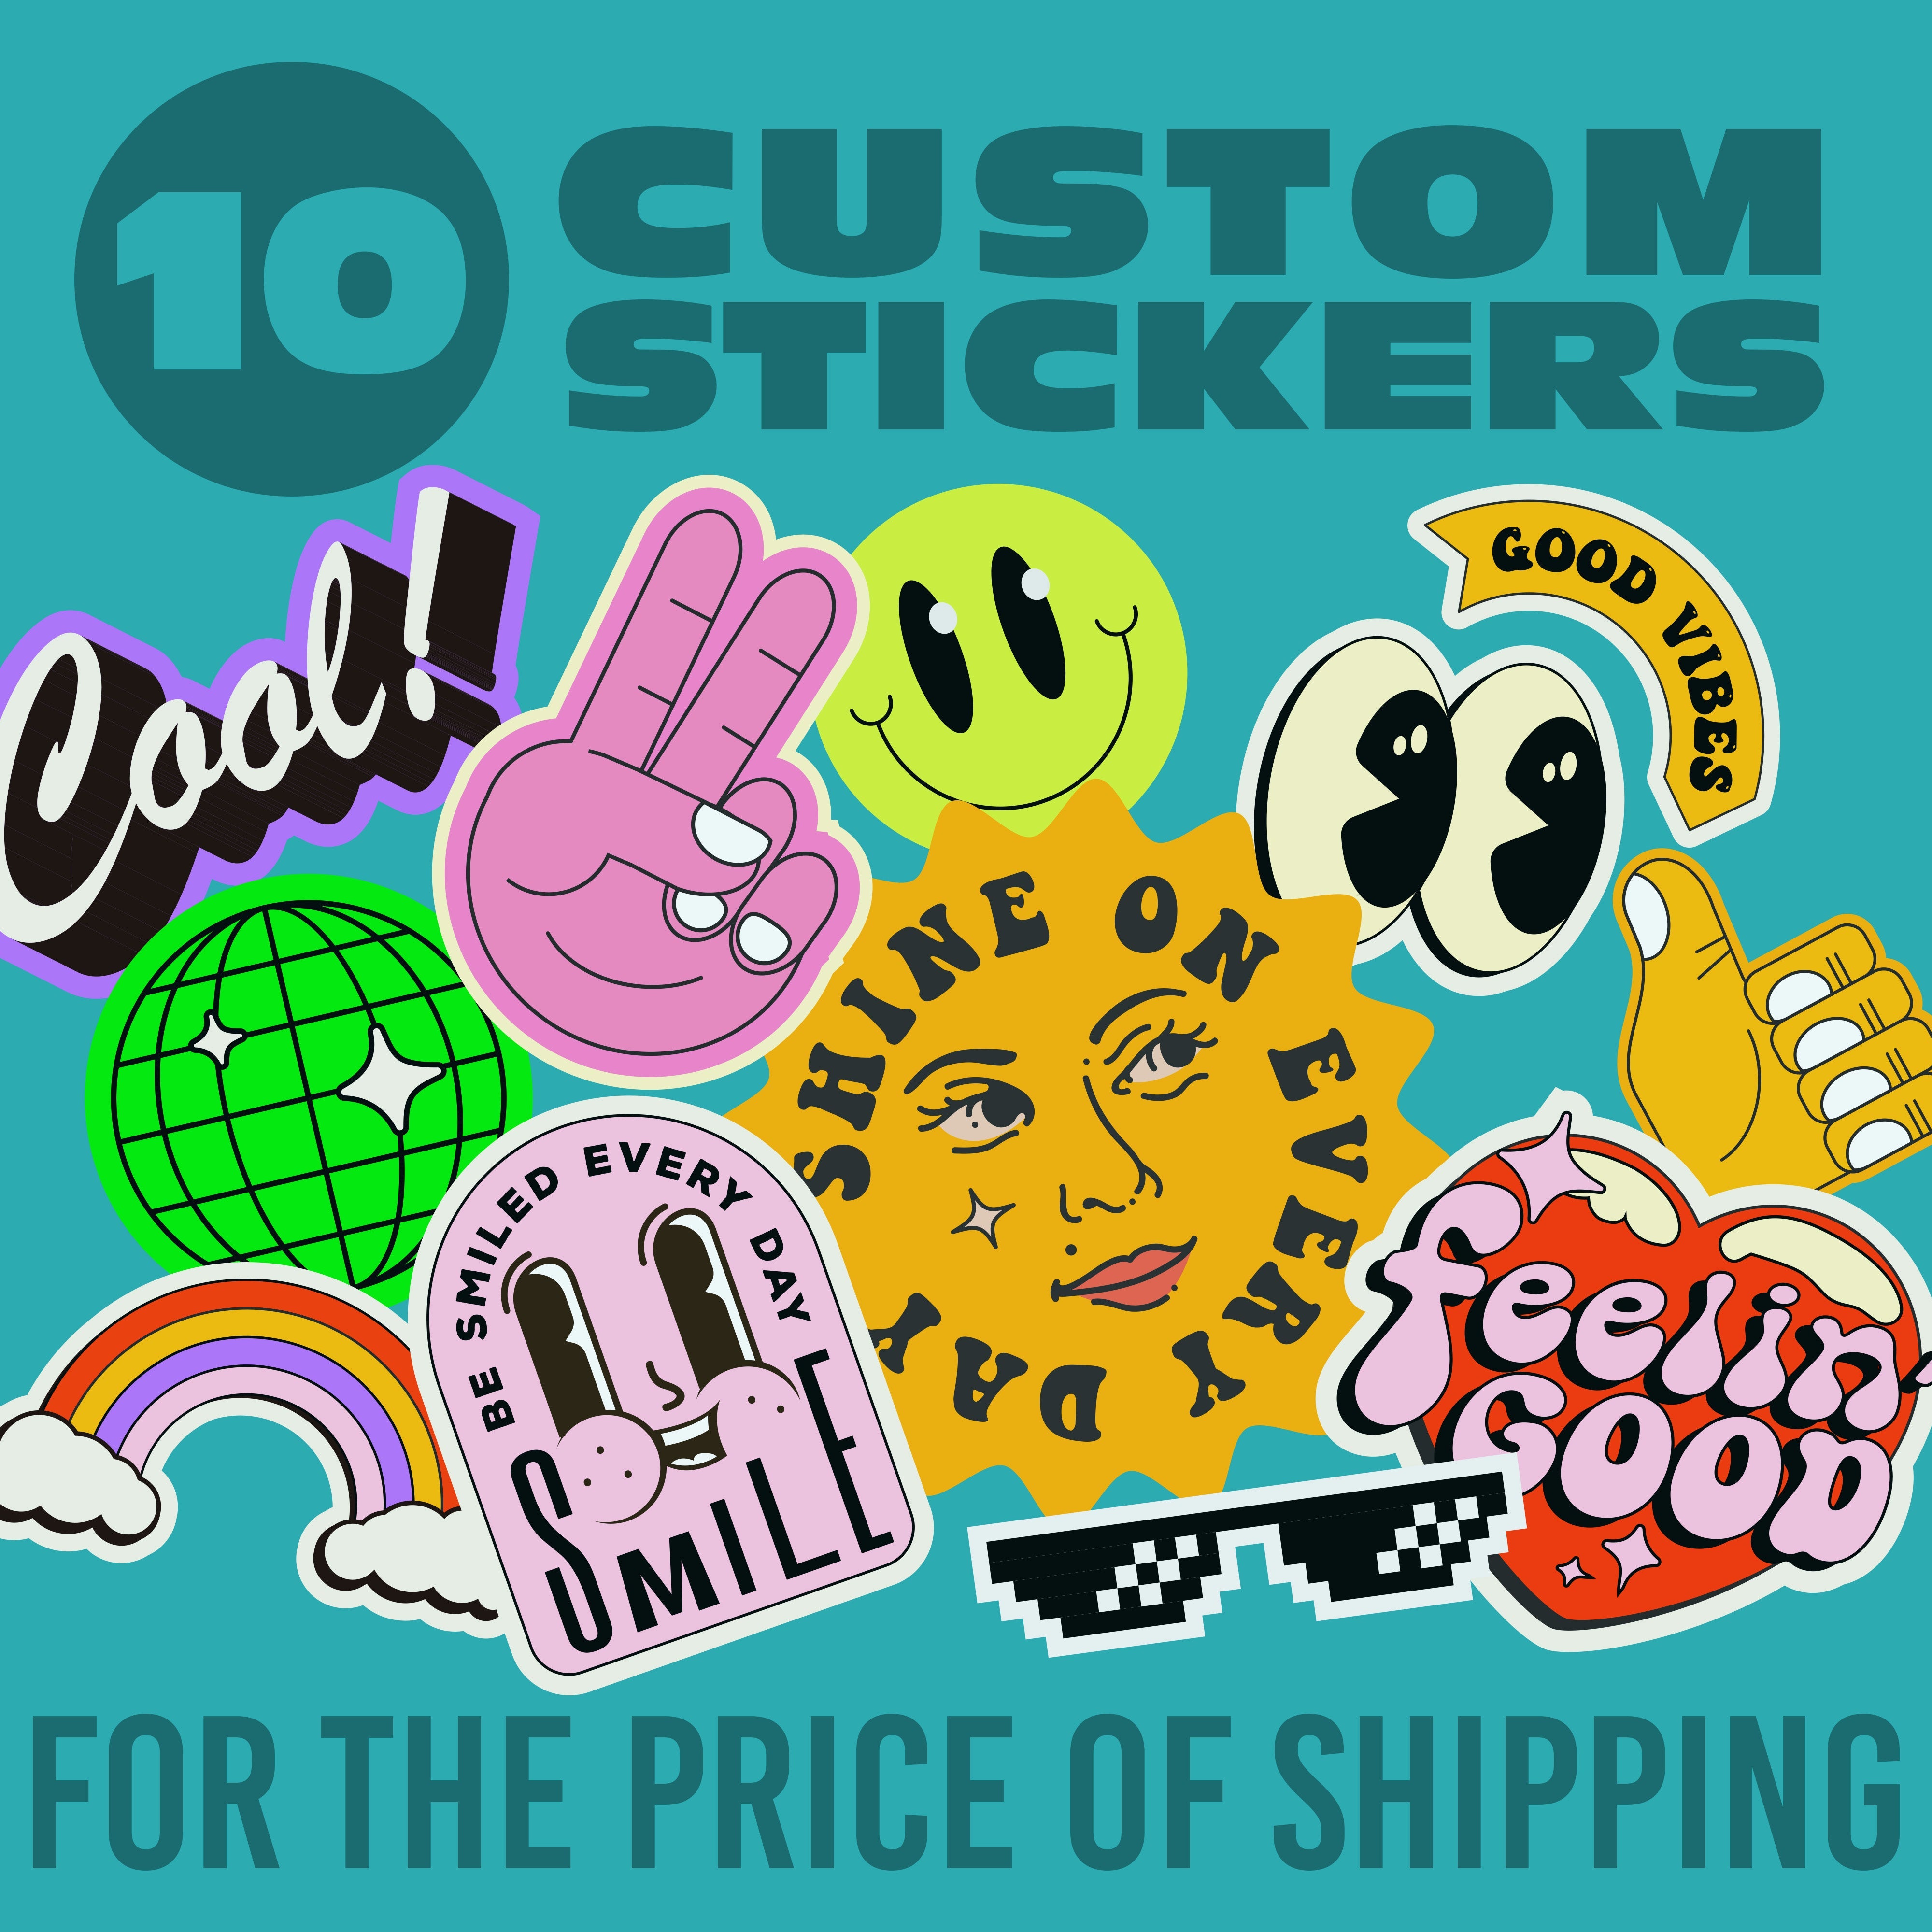 1 Bulk Stickers, 1x1 Stickers, Custom Stickers, Create Your Own Stickers,  Modern Stickers, Neutral Stickers, Waterproof Stickers, Stickers 